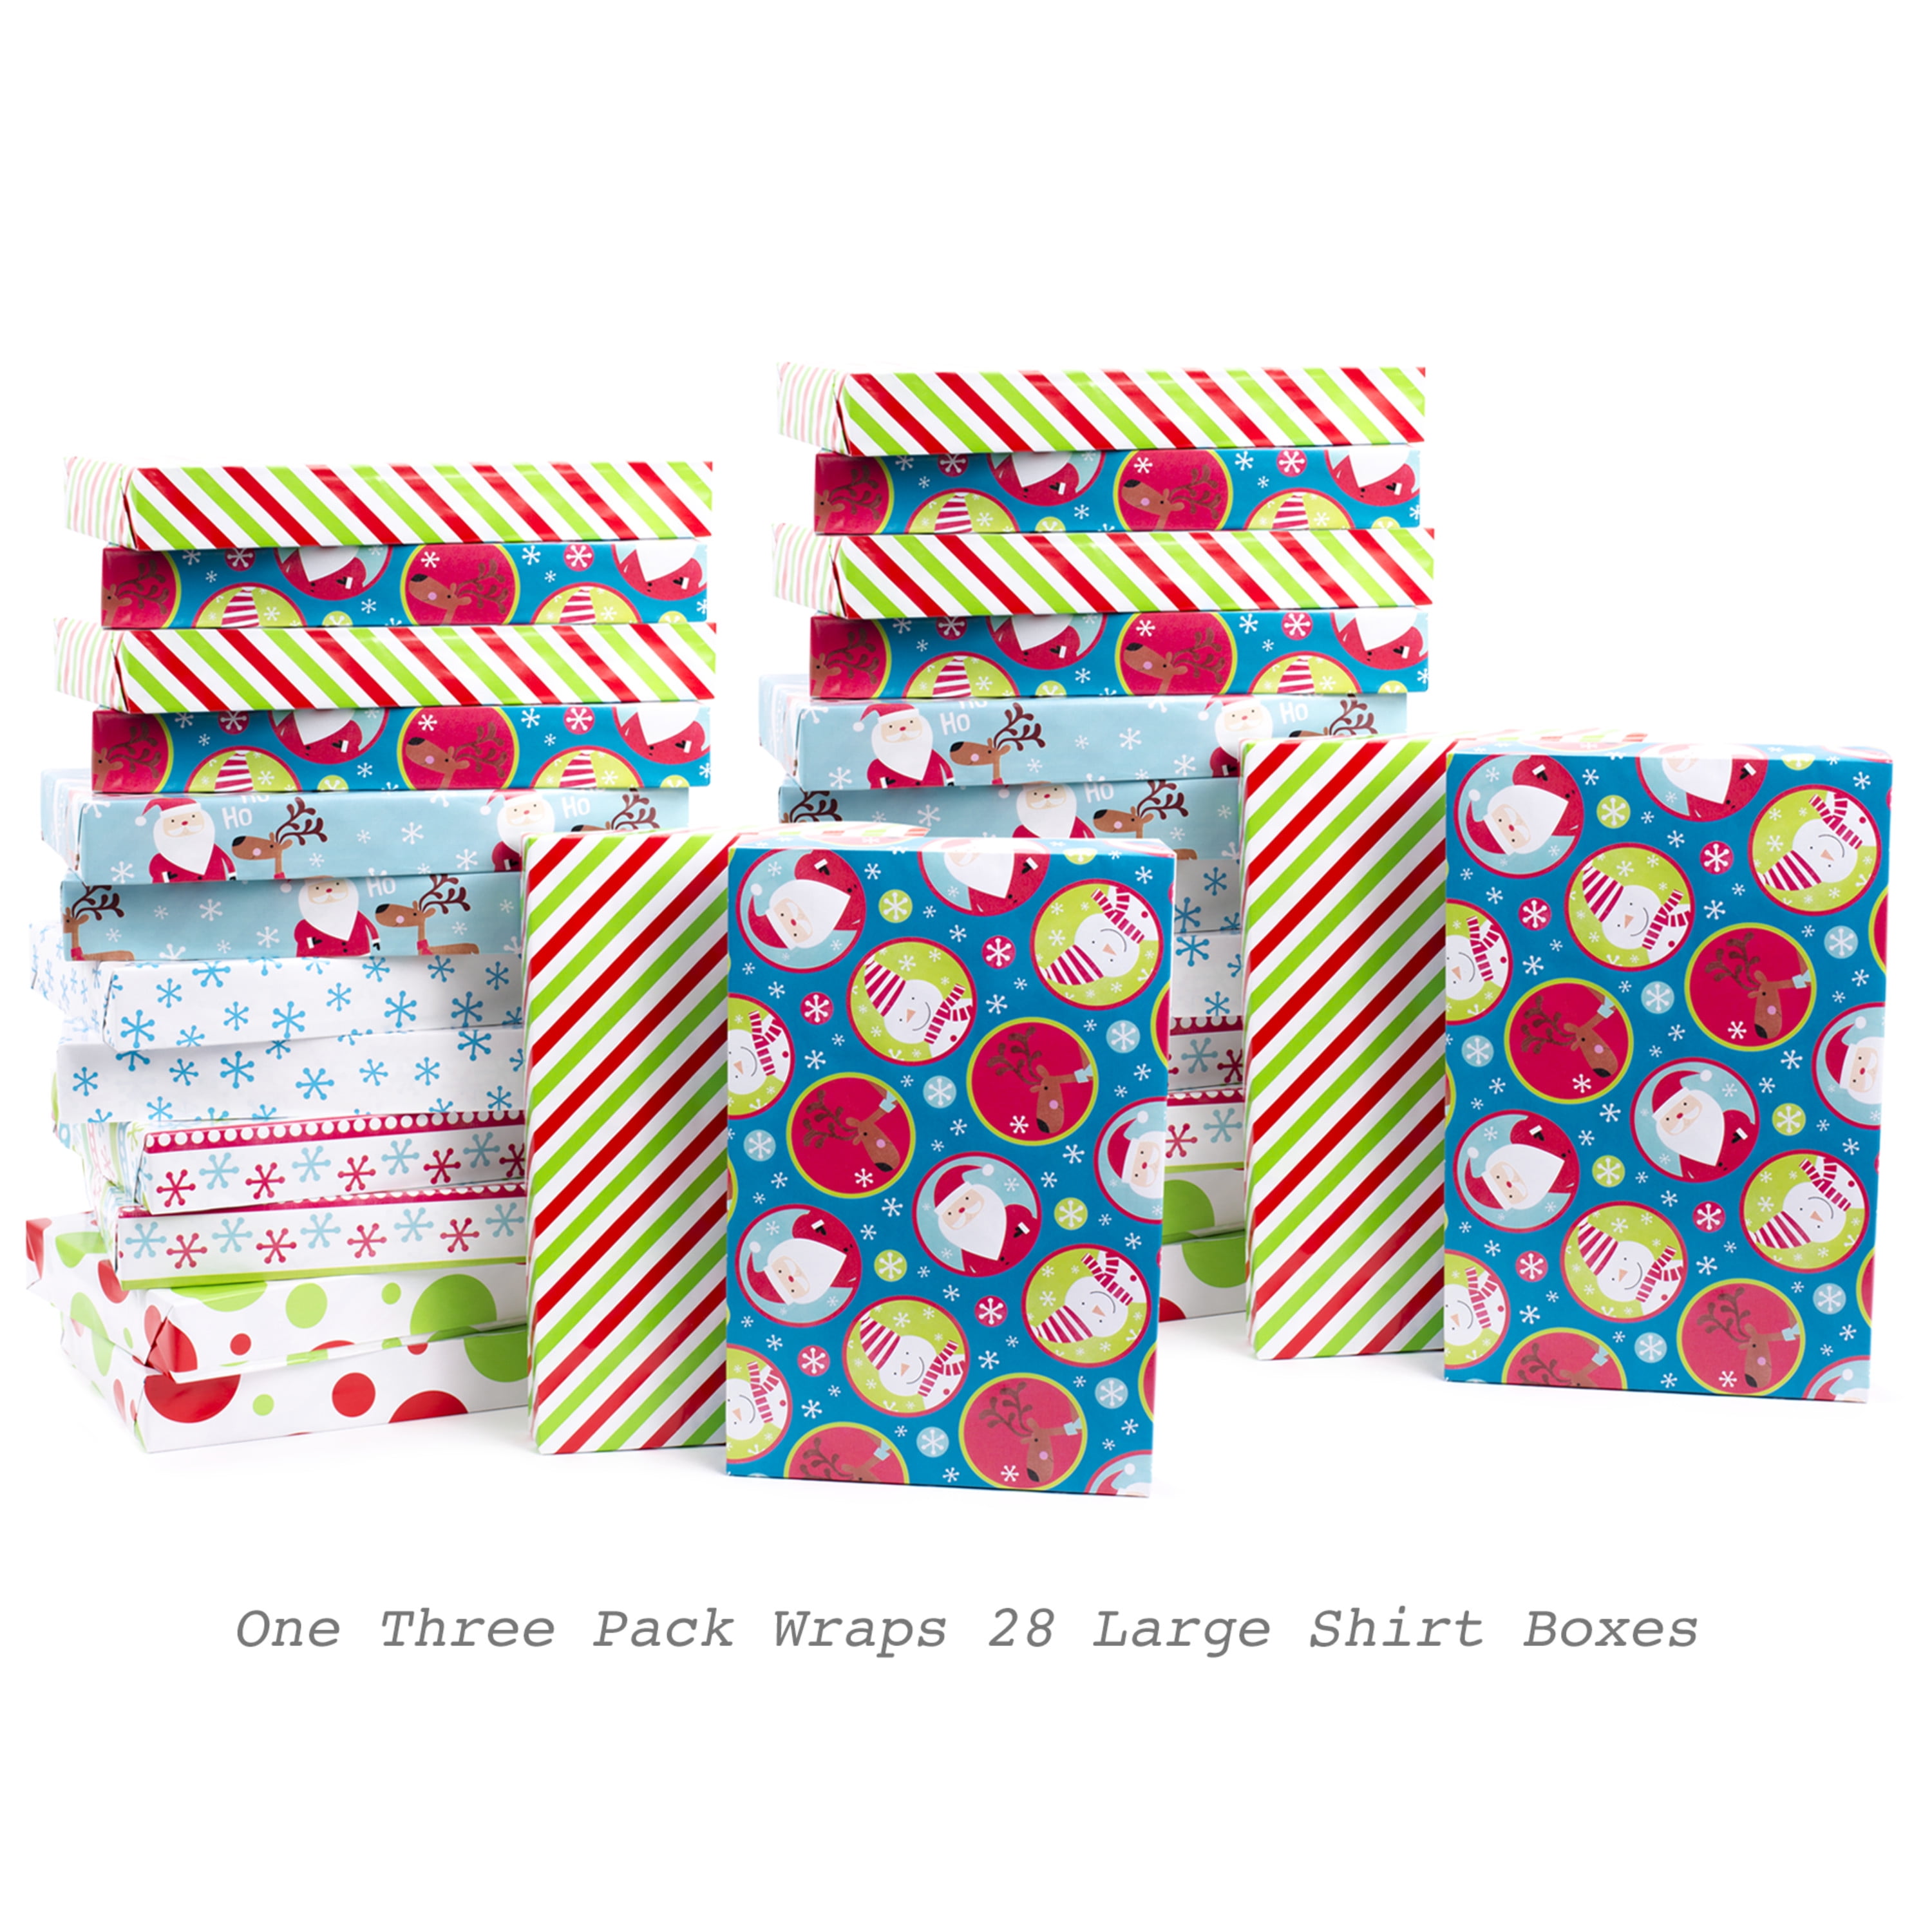  Hallmark Reversible Kids Birthday Wrapping Paper (3 Rolls: 120  sq. ft. ttl.) Monsters and Unicorns, Polka Dots, Chevron, Pink, Teal, Blue,  Red, Orange, Lime Green : Health & Household